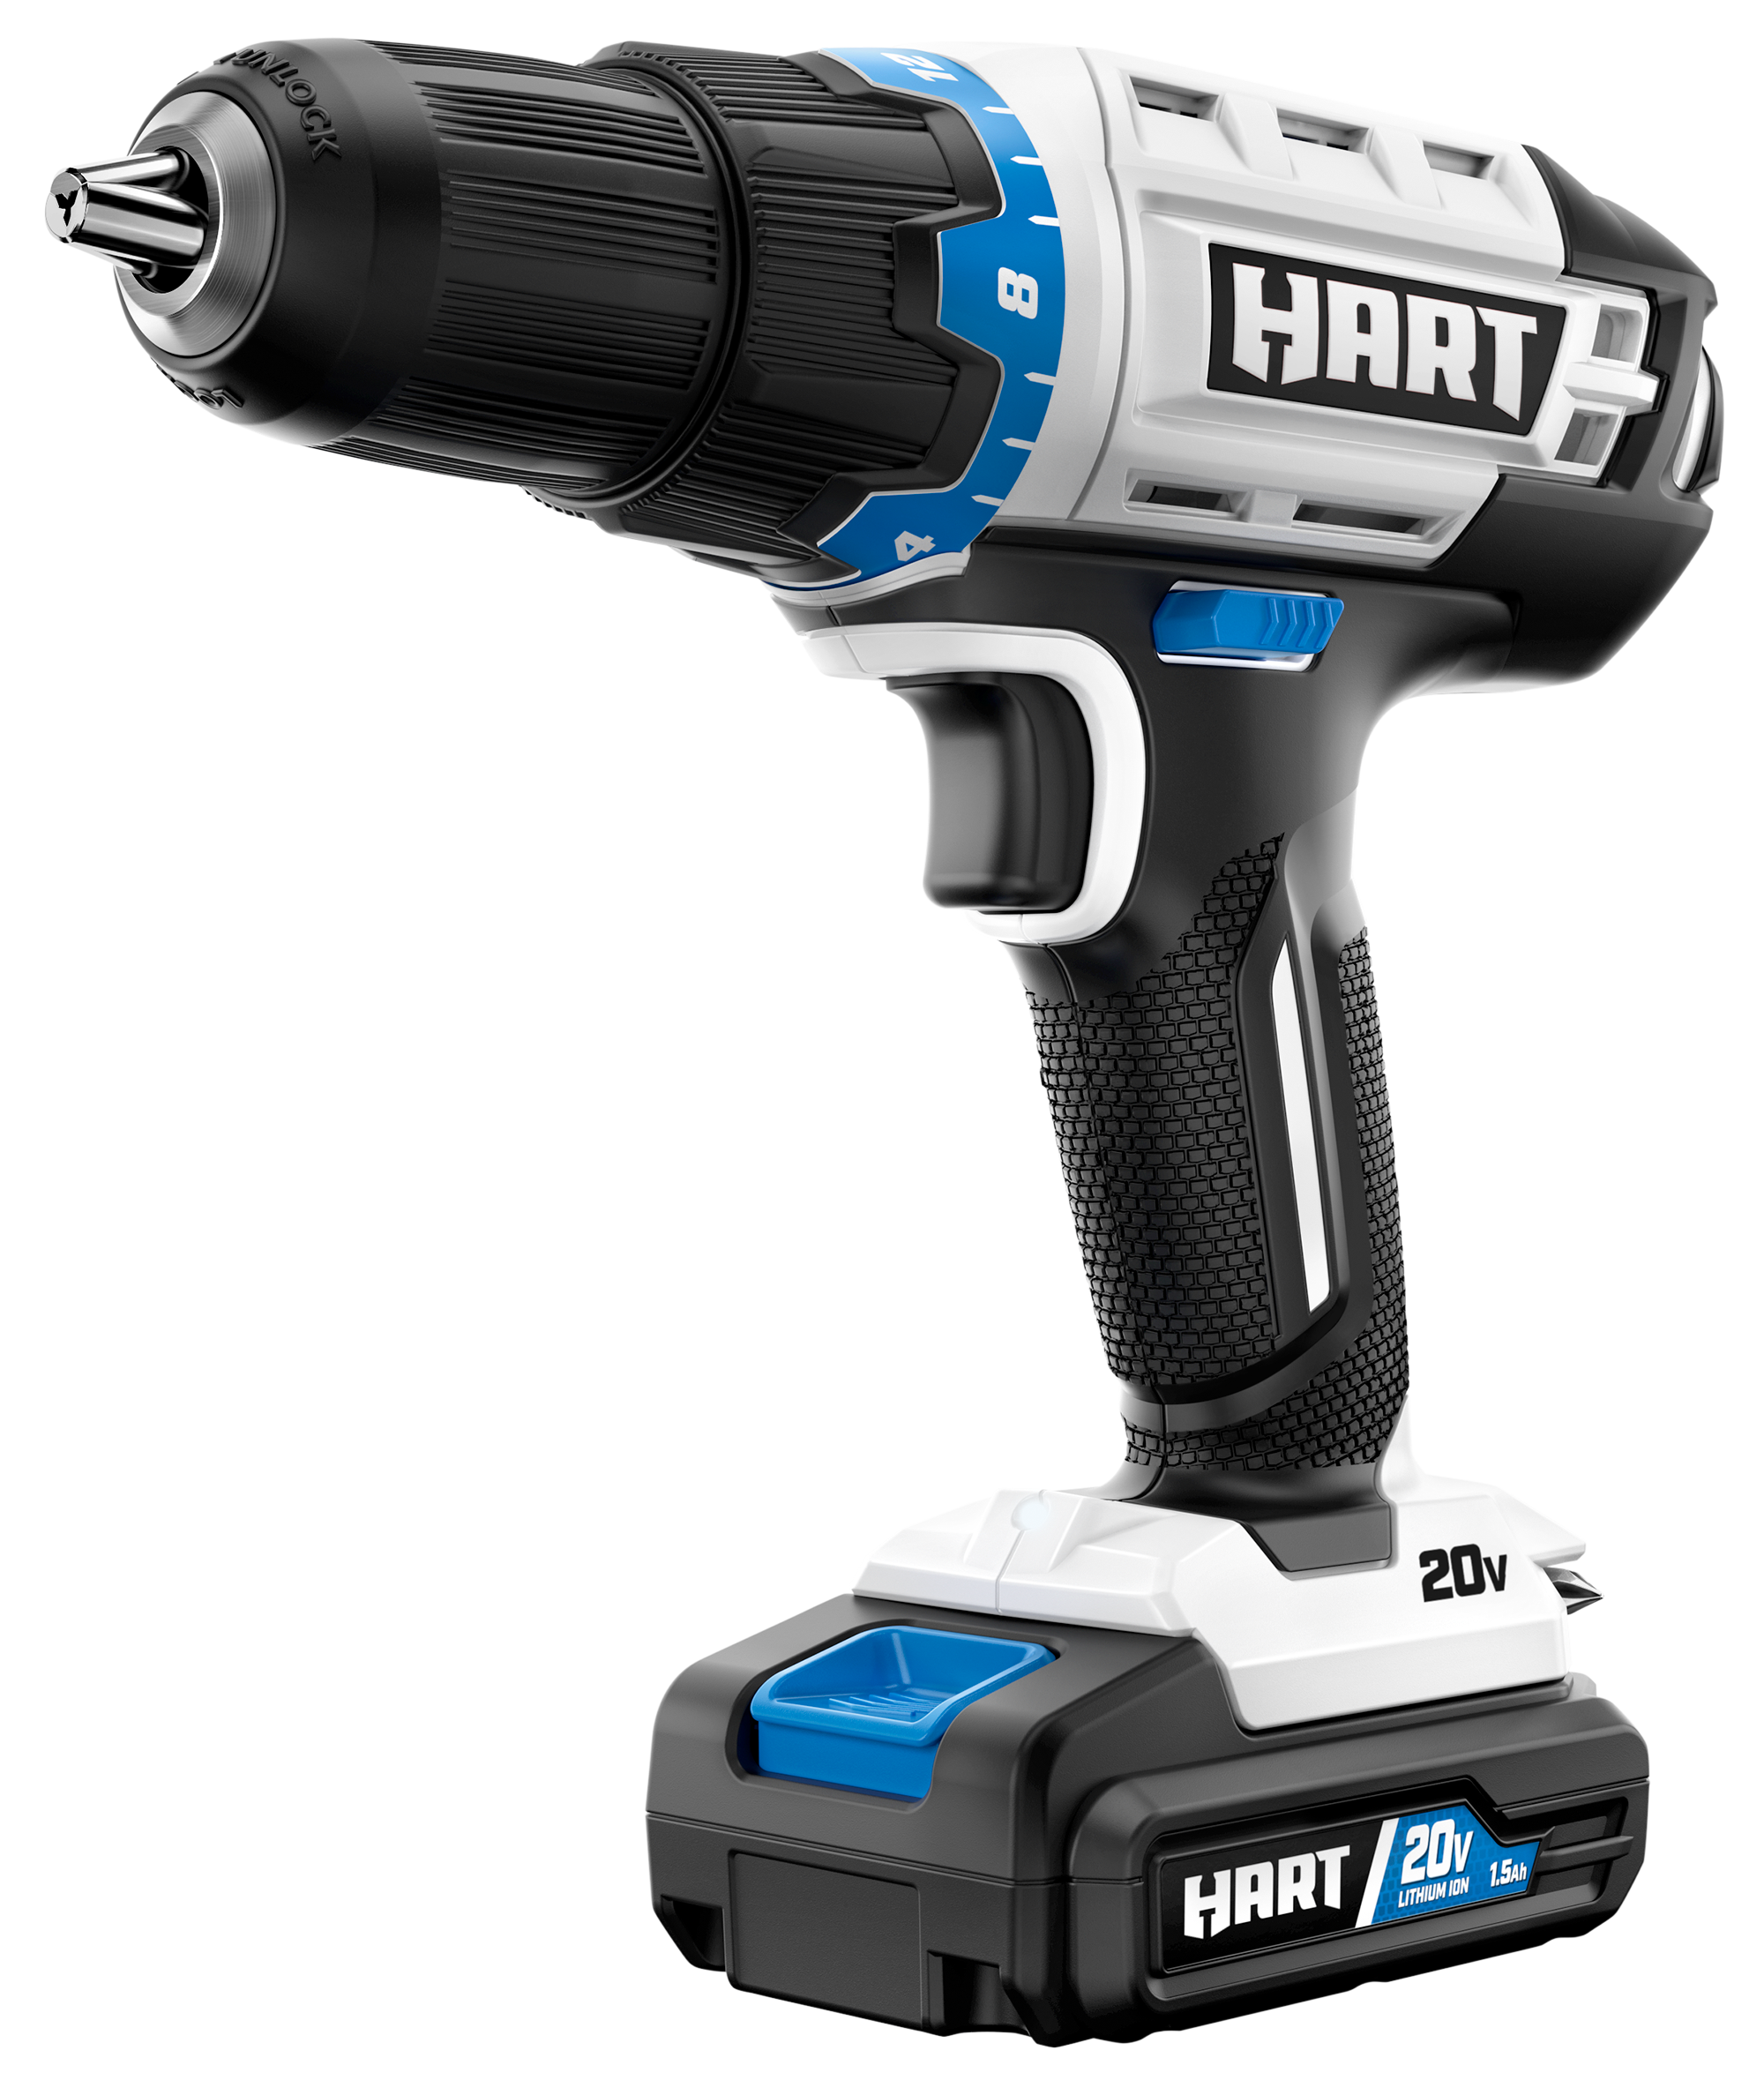 HART 20-Volt Cordless Drill and Impact Combo Kit with (2) 1.5Ah Lithium-Ion Batteries and Charger - image 5 of 11